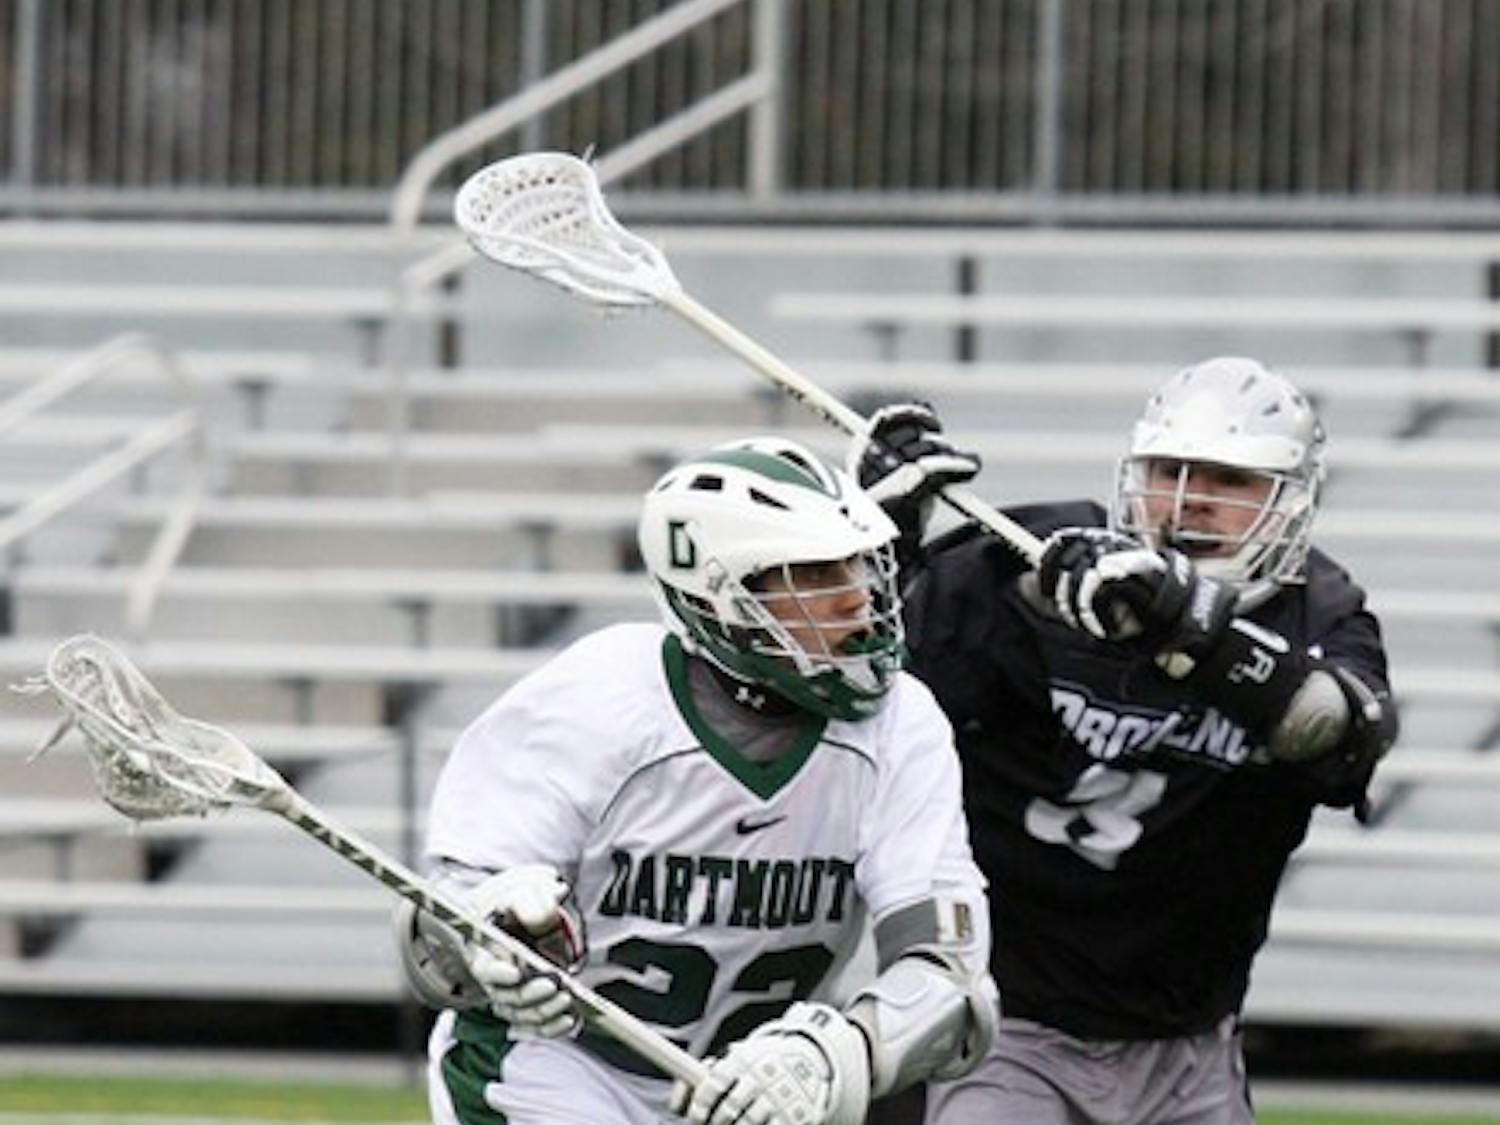 Jimmy Mullen '09 had five shots in Dartmouth's 8-4 victory over the University of Providence Tuesday in Hanover.